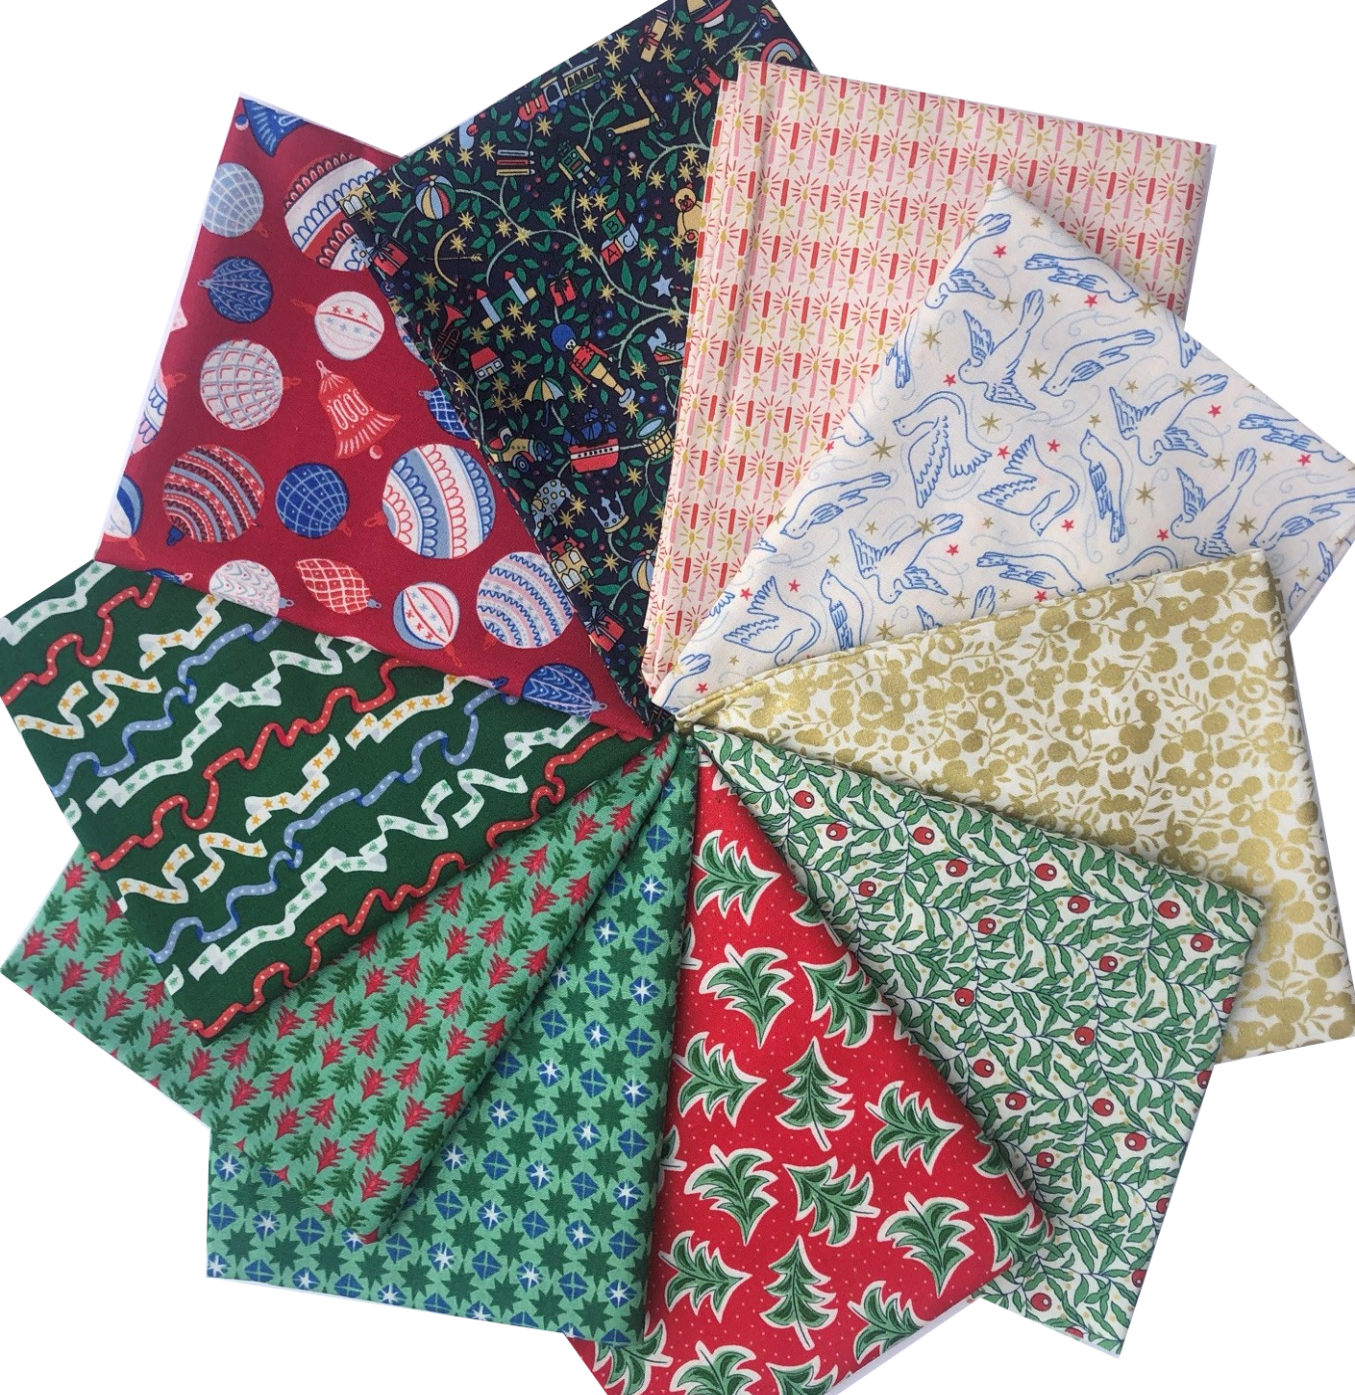 10 Liberty Fat Quarter Bundle - Merry and Bright 2 Collection